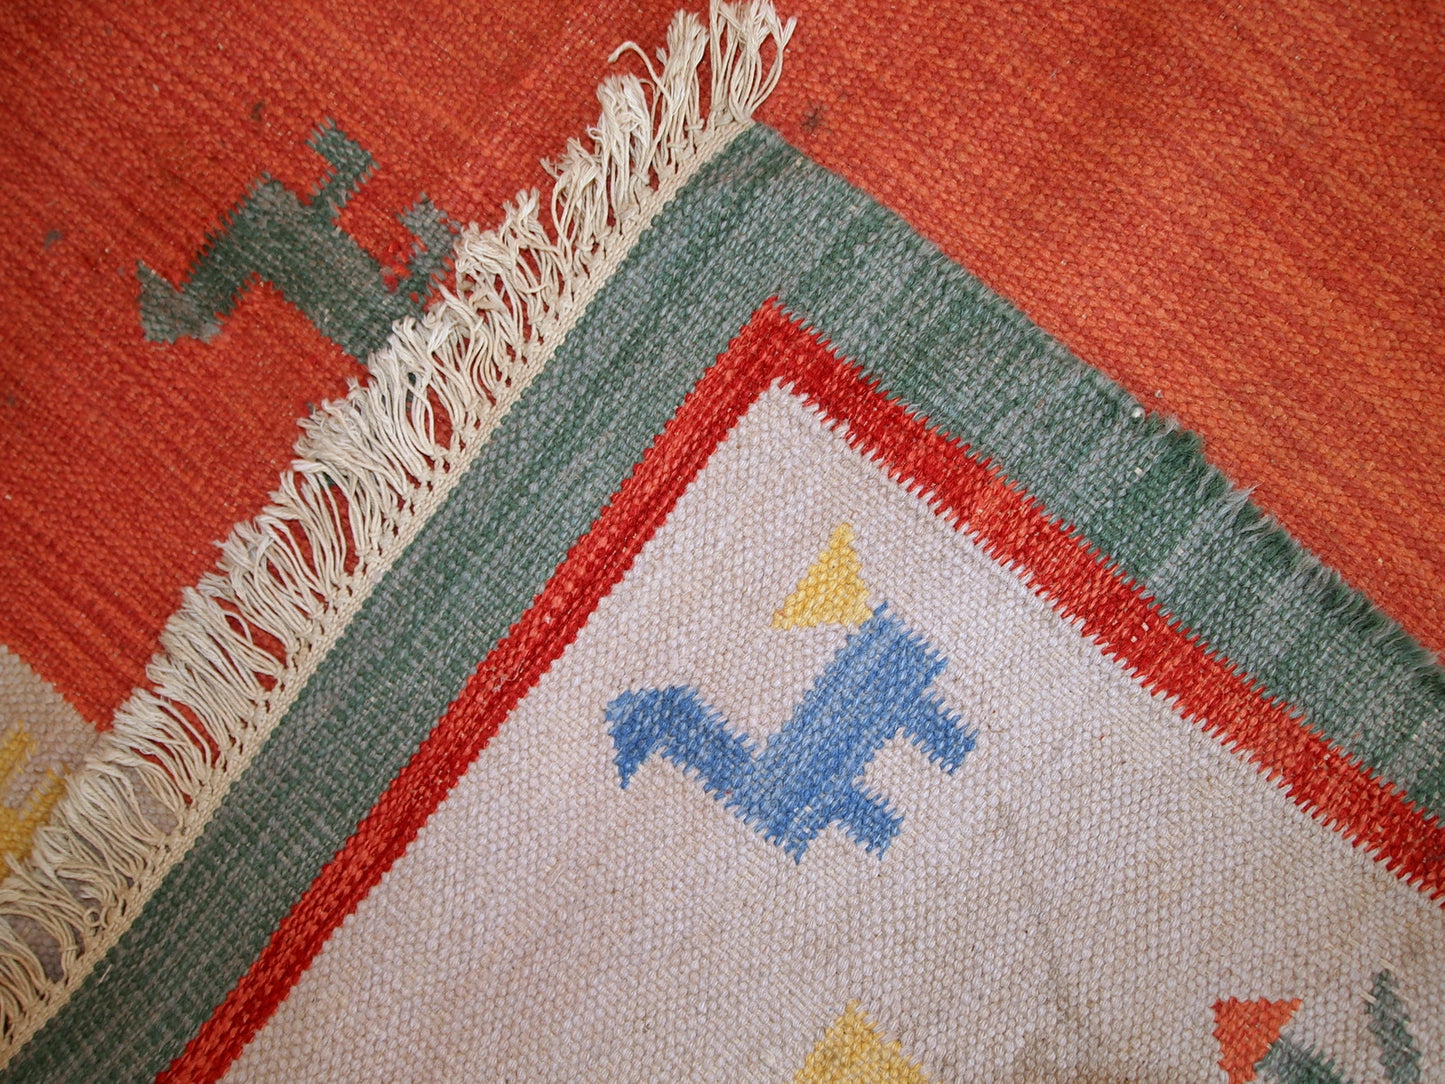 Vintage Persian kilim in bright shades of red, sky blue, beige and yellow. One side of the kilim has some age wear, but generally it is in original good condition.